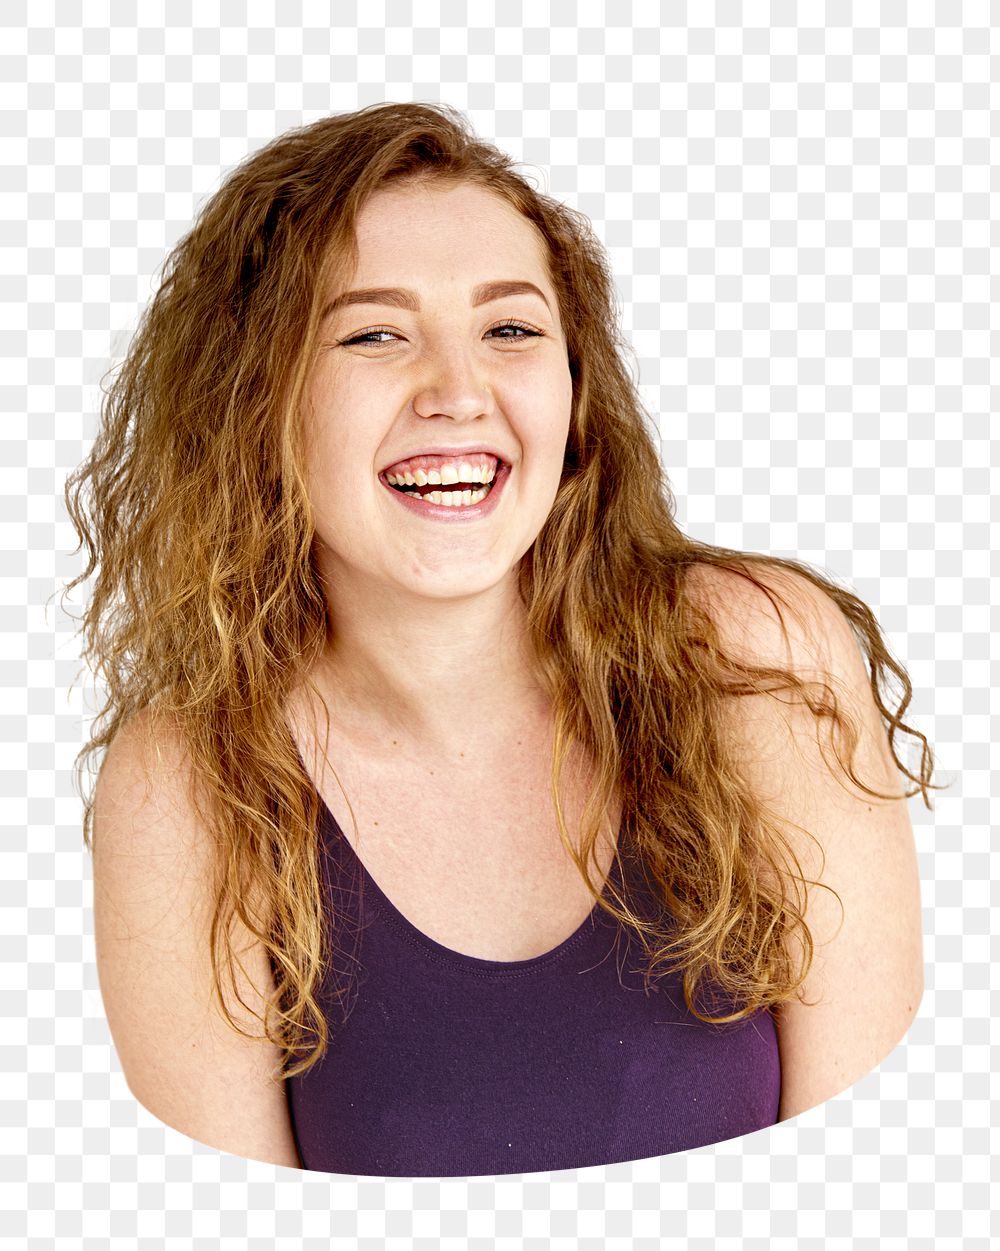 Young lady png element, transparent background